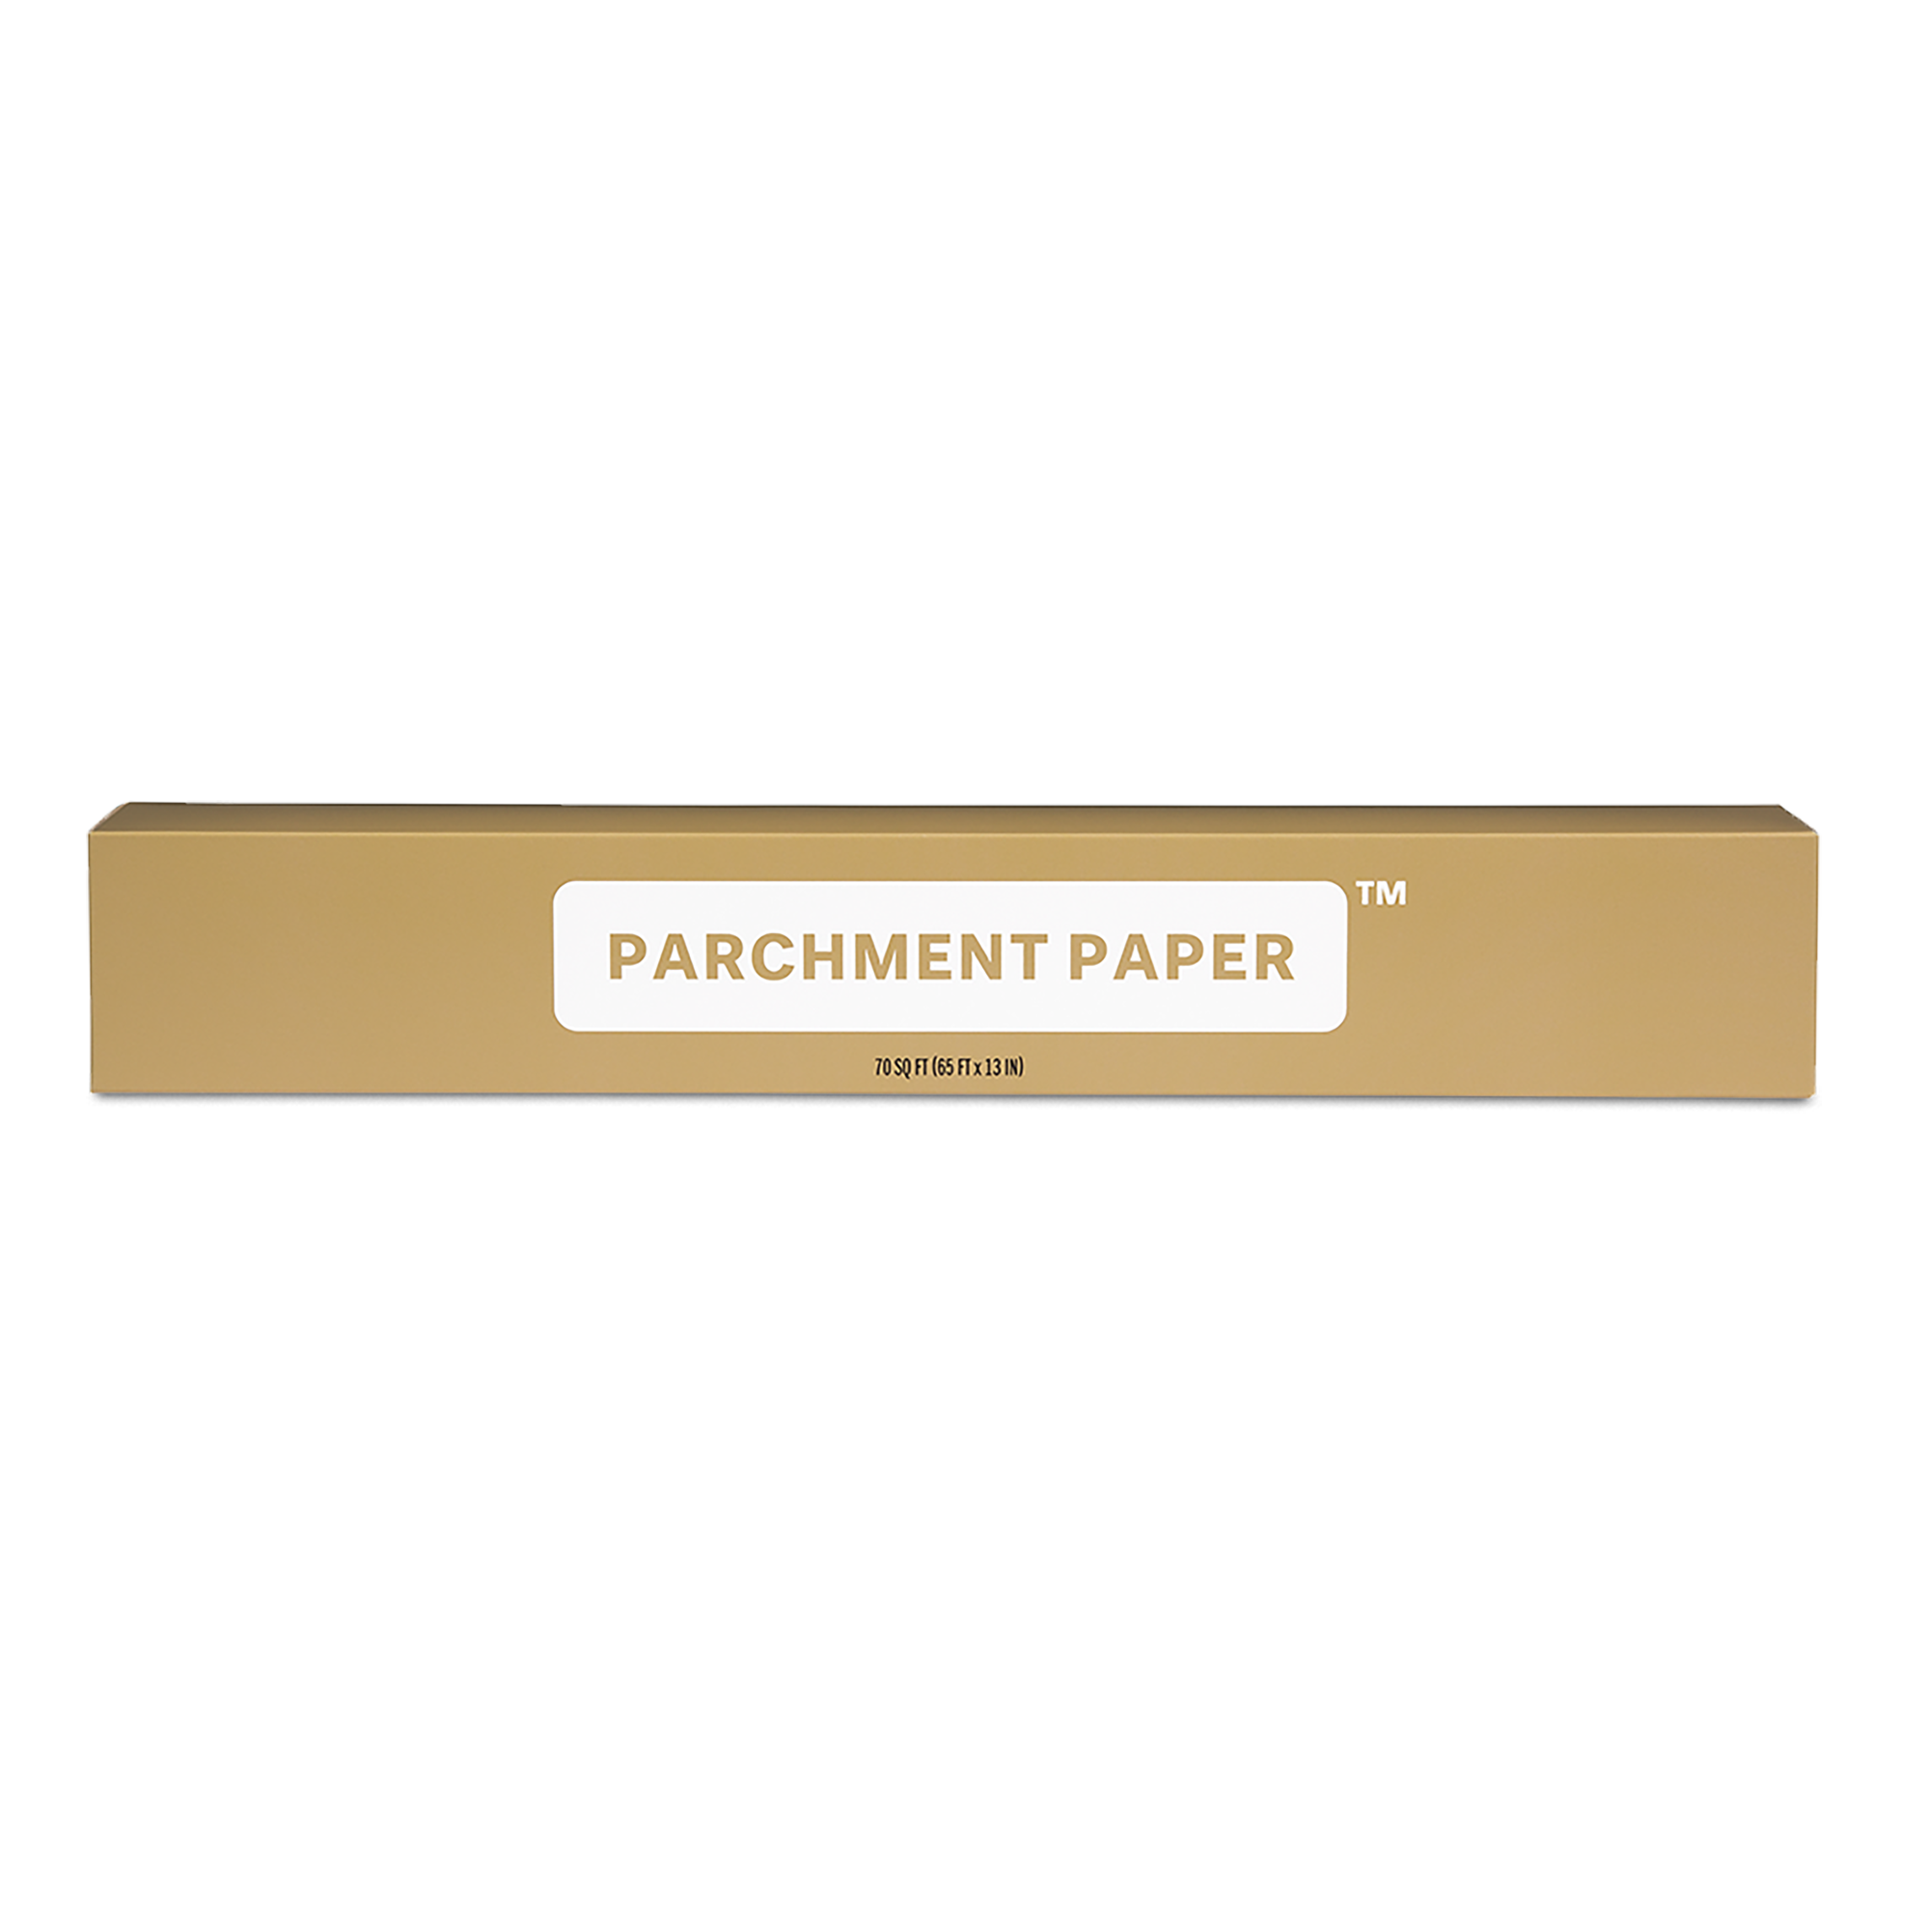 Product photo, front of box showing the product name: parchment paper.